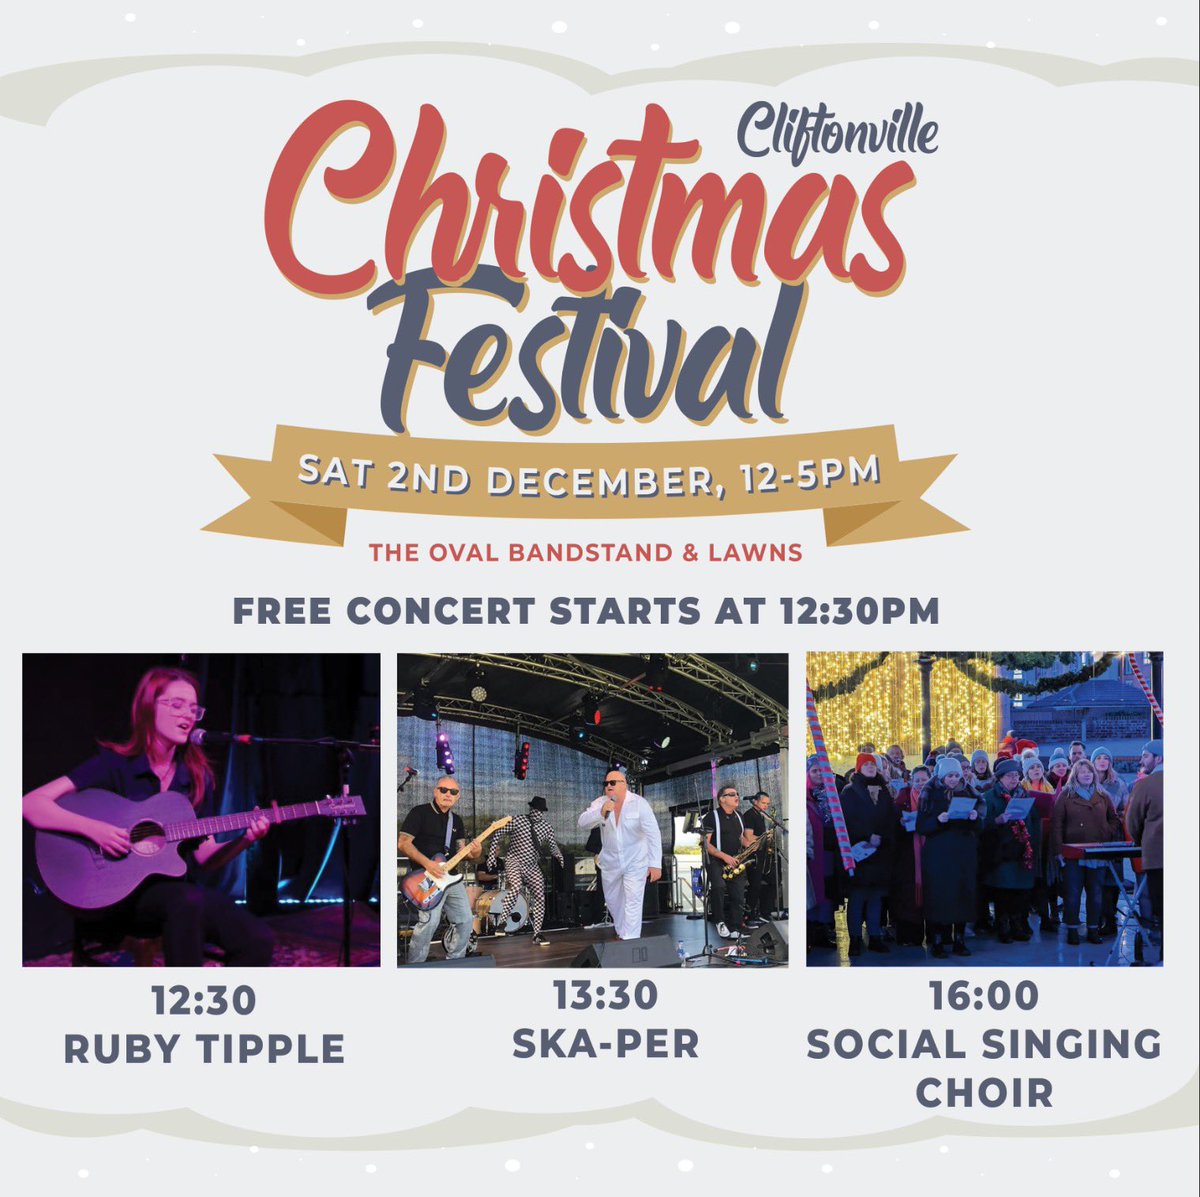 🎄🌟✨ Get ready to jingle all the way at the Cliftonville Christmas Festival! 🎶 Join us for a day of merry music and festive fun! 🎅🎁 Let's make this a Christmas to remember! ✨ #CliftonvilleChristmas #FestiveFun #Margate #Cliftonville #Thanet #Ska #TheOvalBandstand #Ramsgate